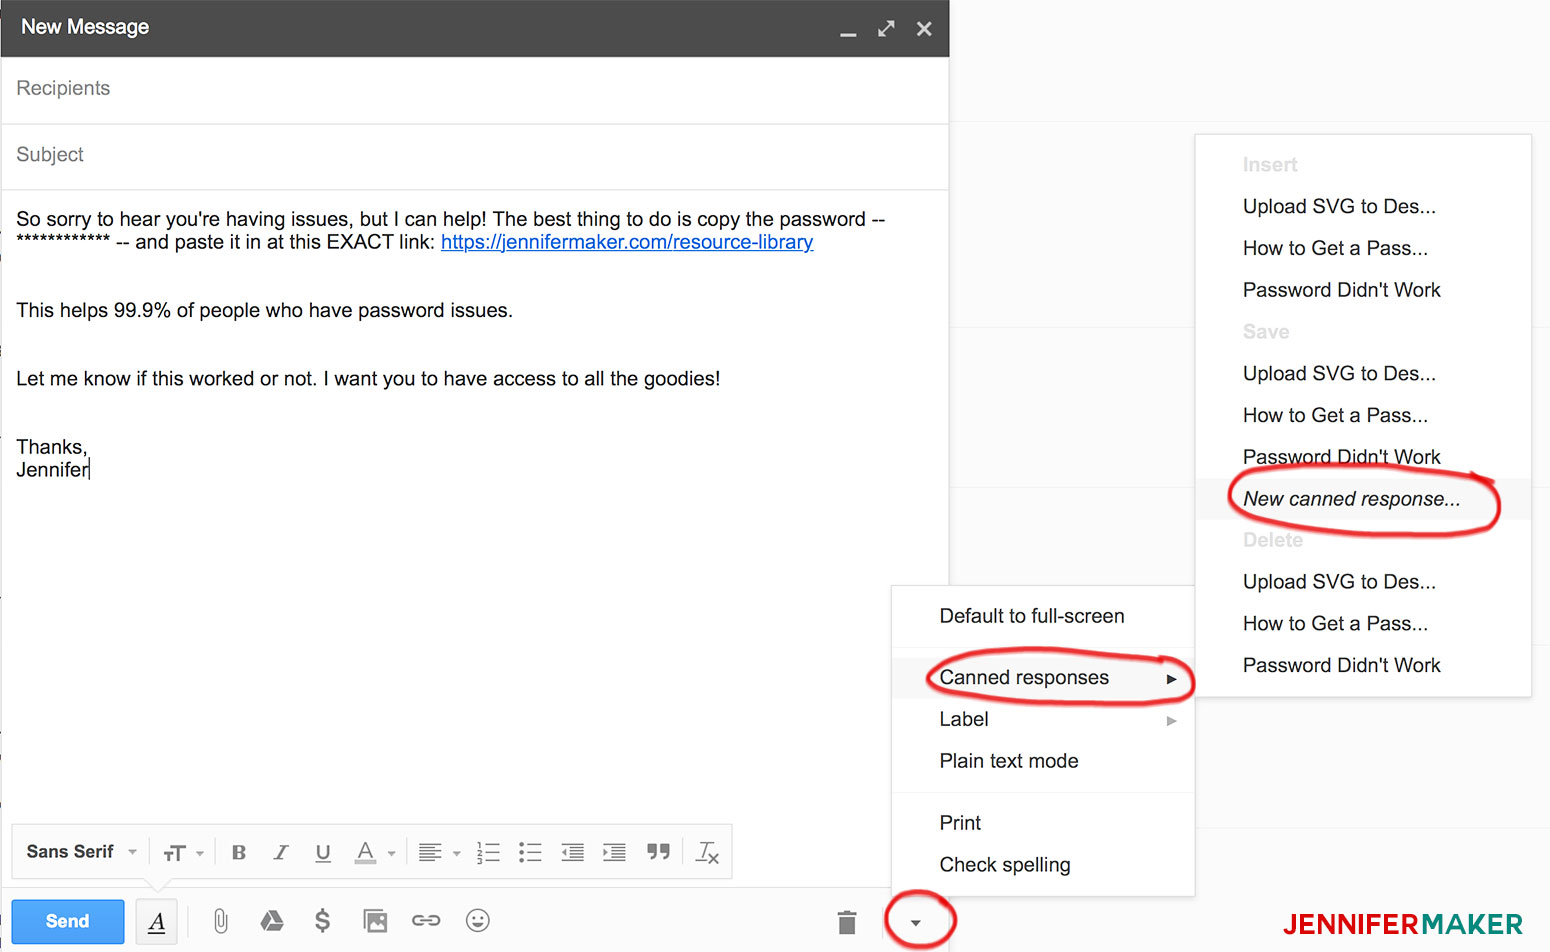 Saving a new Canned Response to Respond to Blog Emails Better